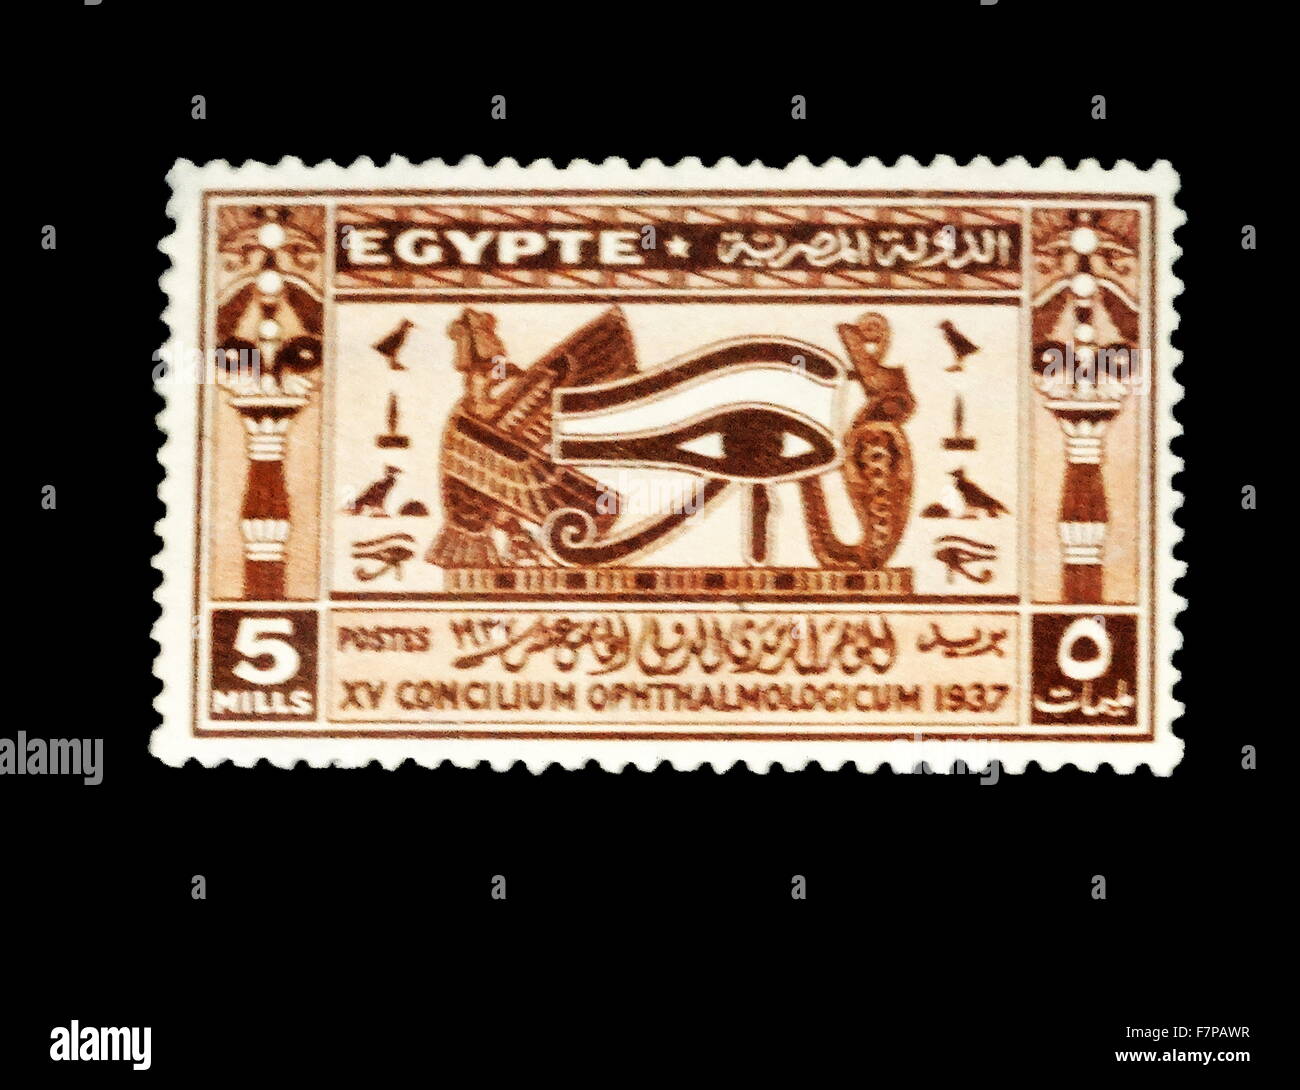 1937 Egyptian postage stamps with symbols of the The Eye of Horus. This was an ancient Egyptian symbol of protection, royal power and good health. The eye is personified in the goddess Wadjet Stock Photo